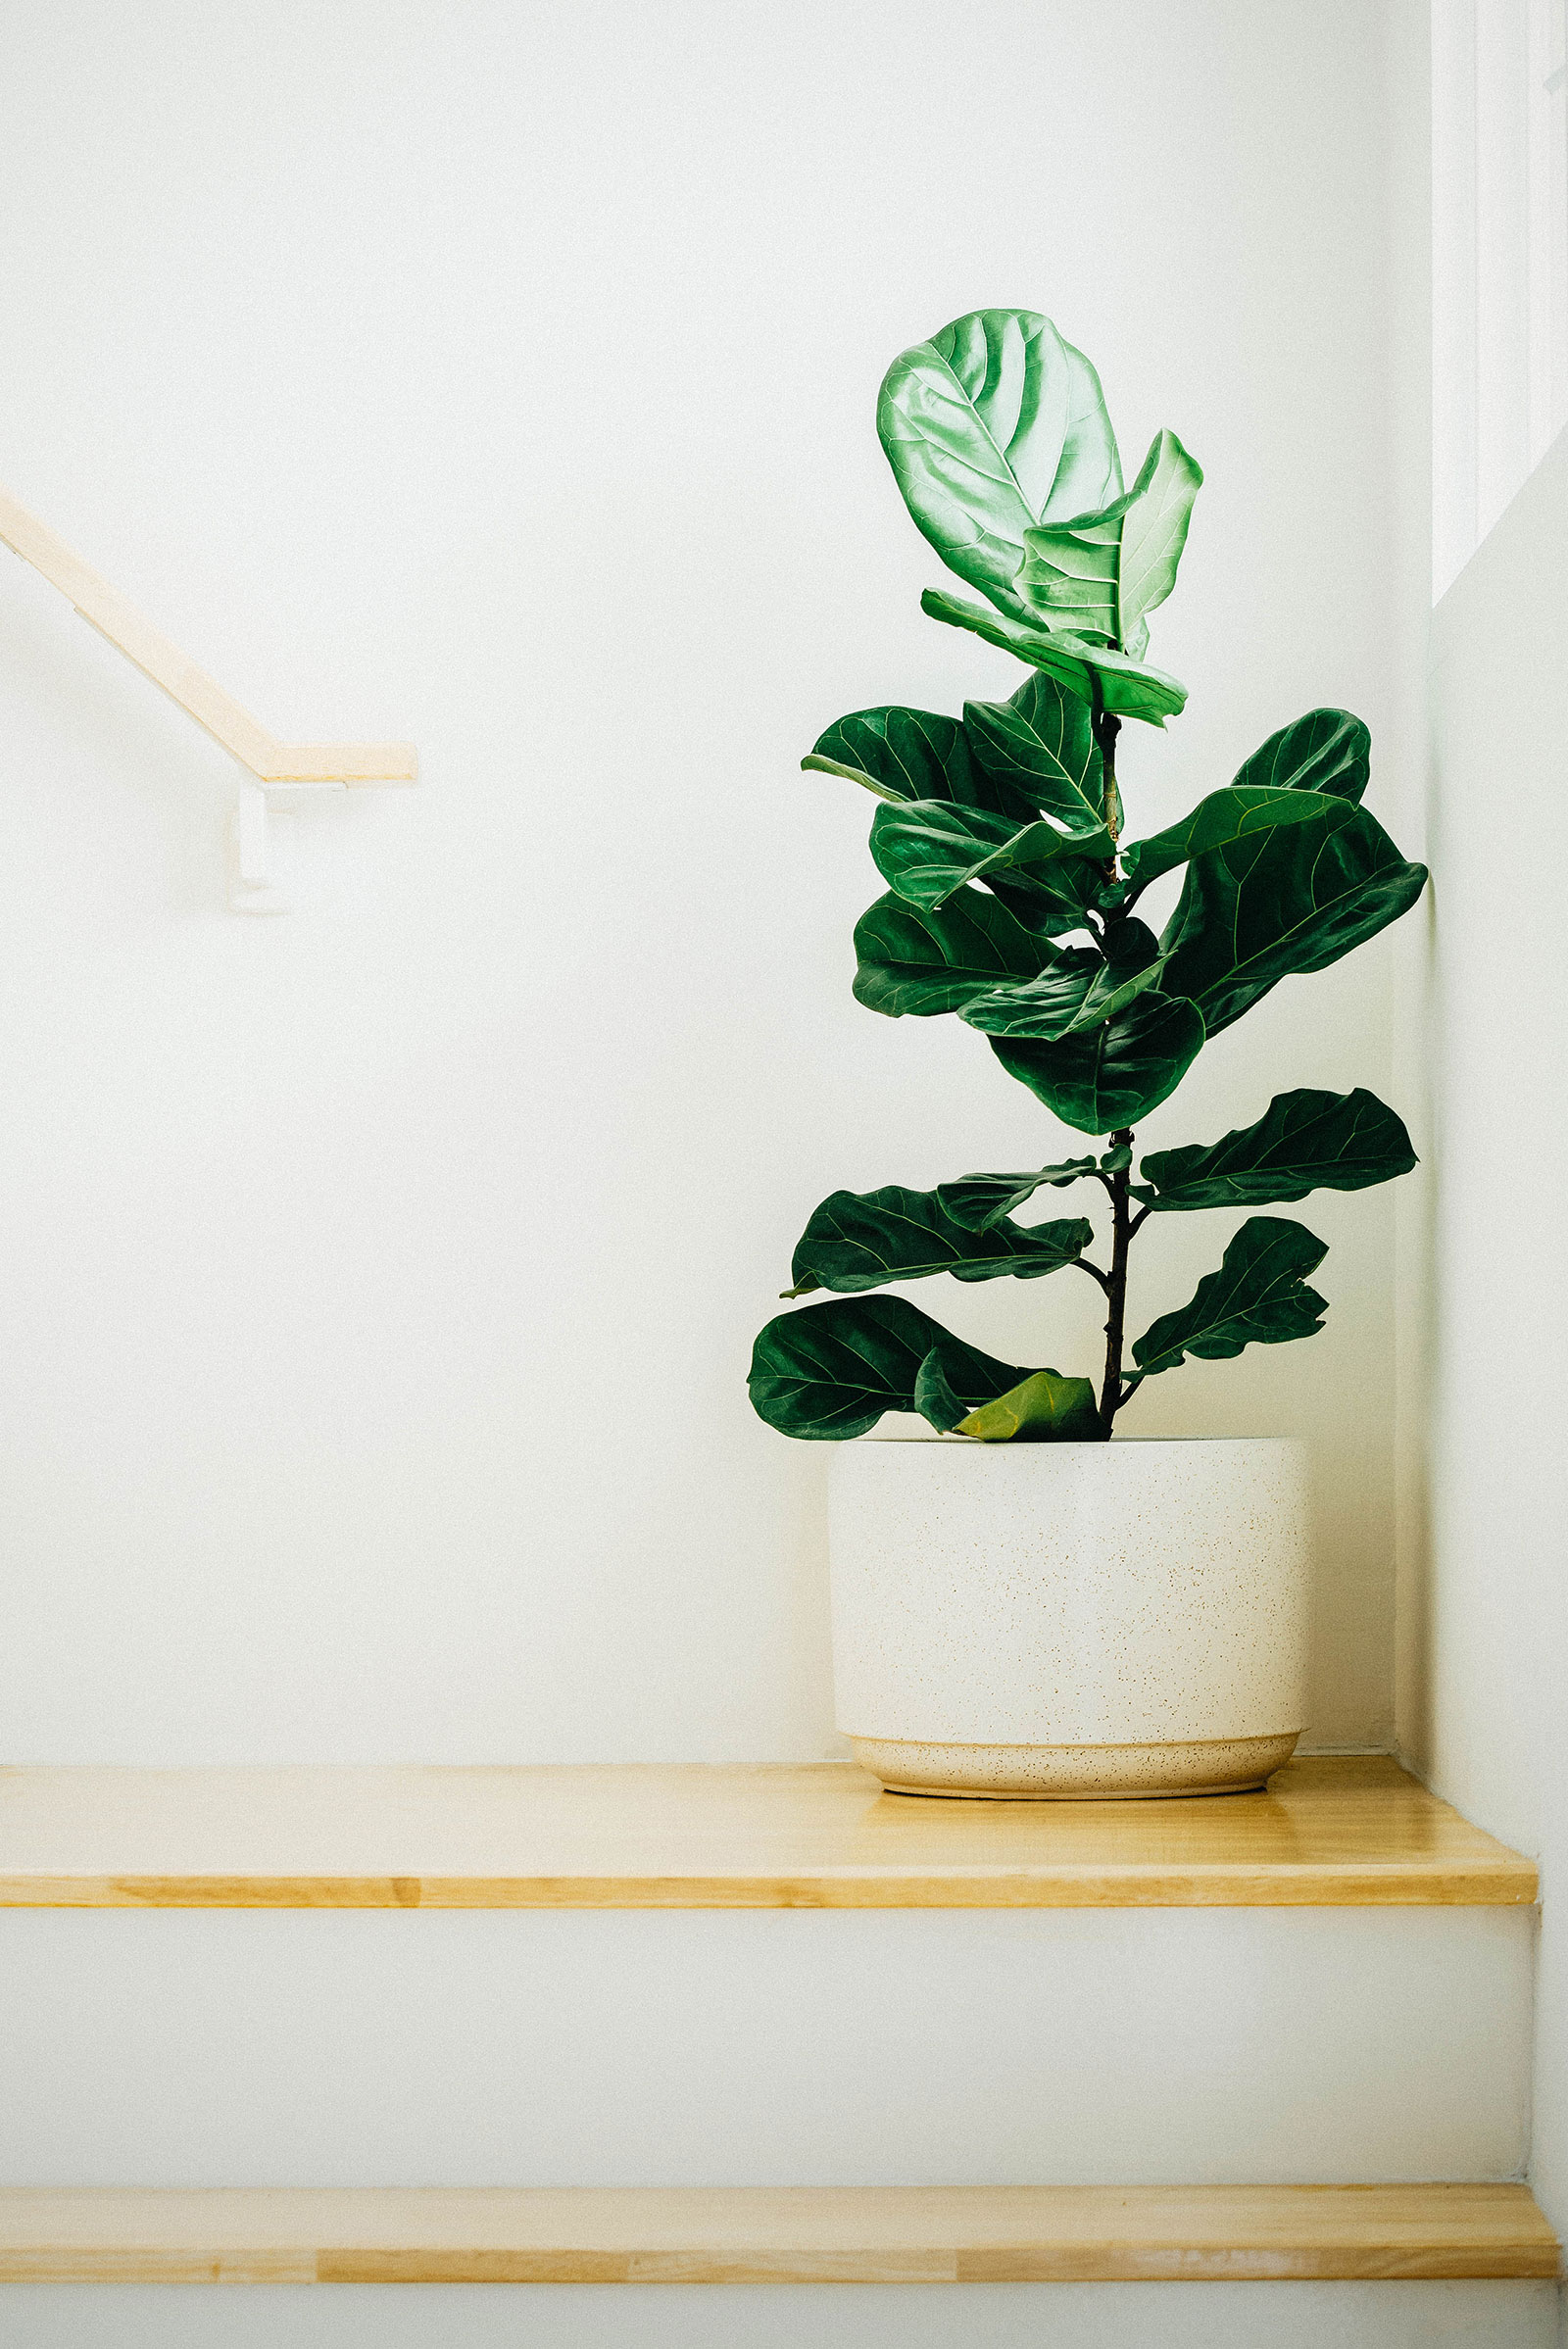 Medium-sized Ficus lyrata plant in a white pot, set on a wooden stair landing in front of a window